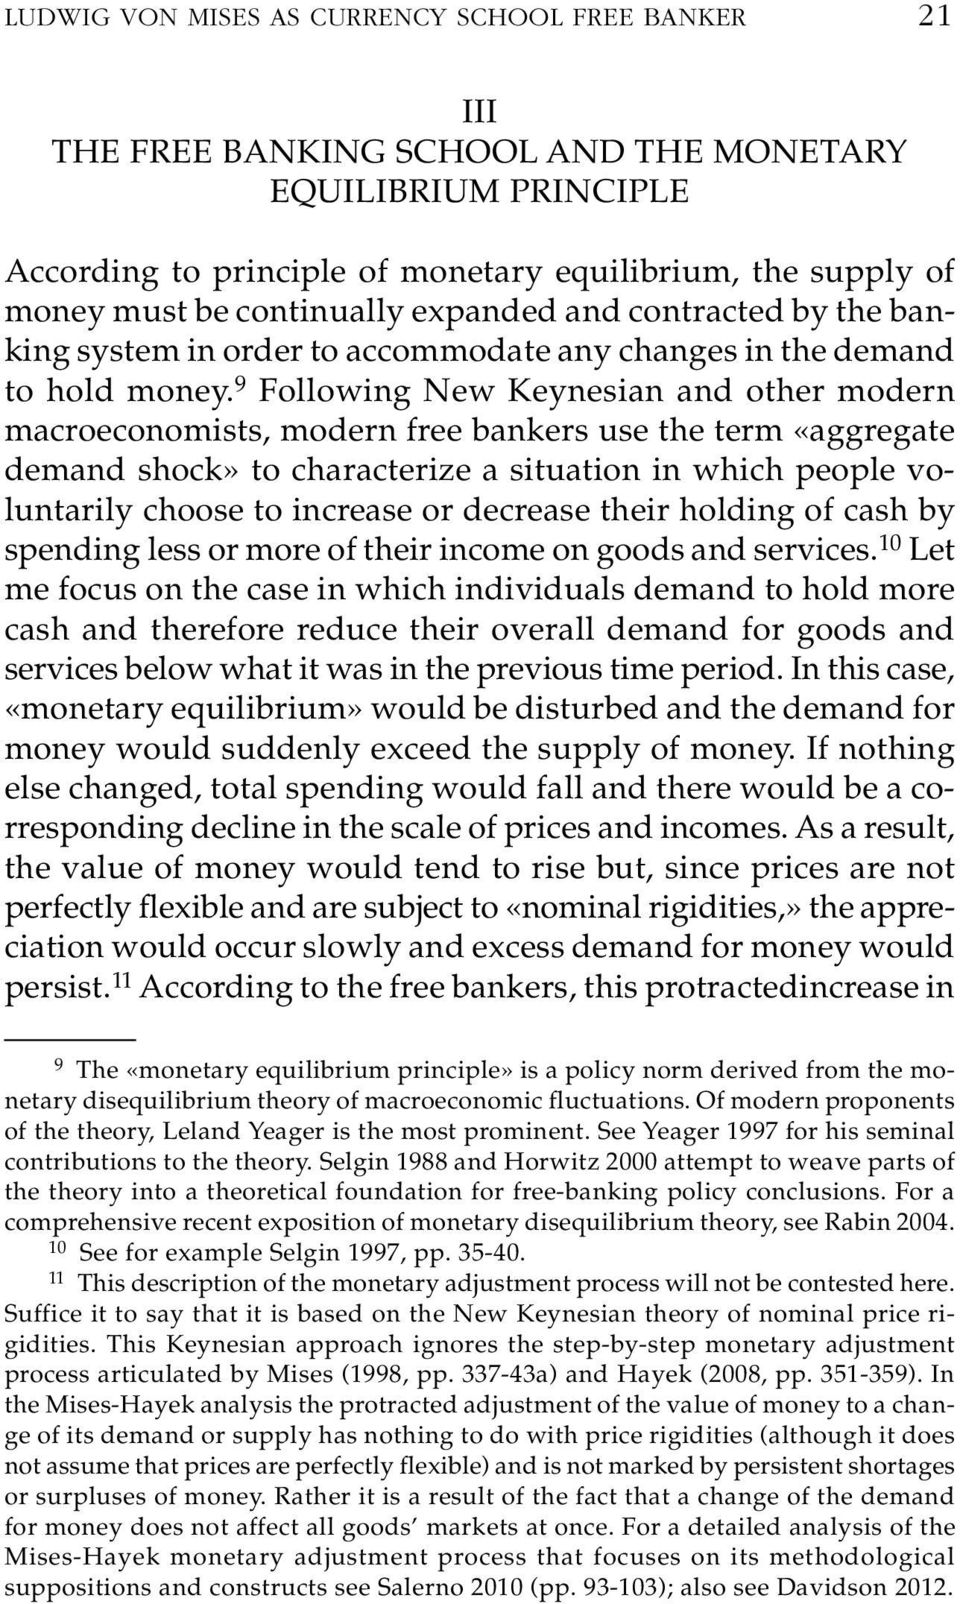 9 Following New Keynesian and other modern macroeconomists, modern free bankers use the term «aggregate demand shock» to characterize a situation in which people vo - luntarily choose to increase or